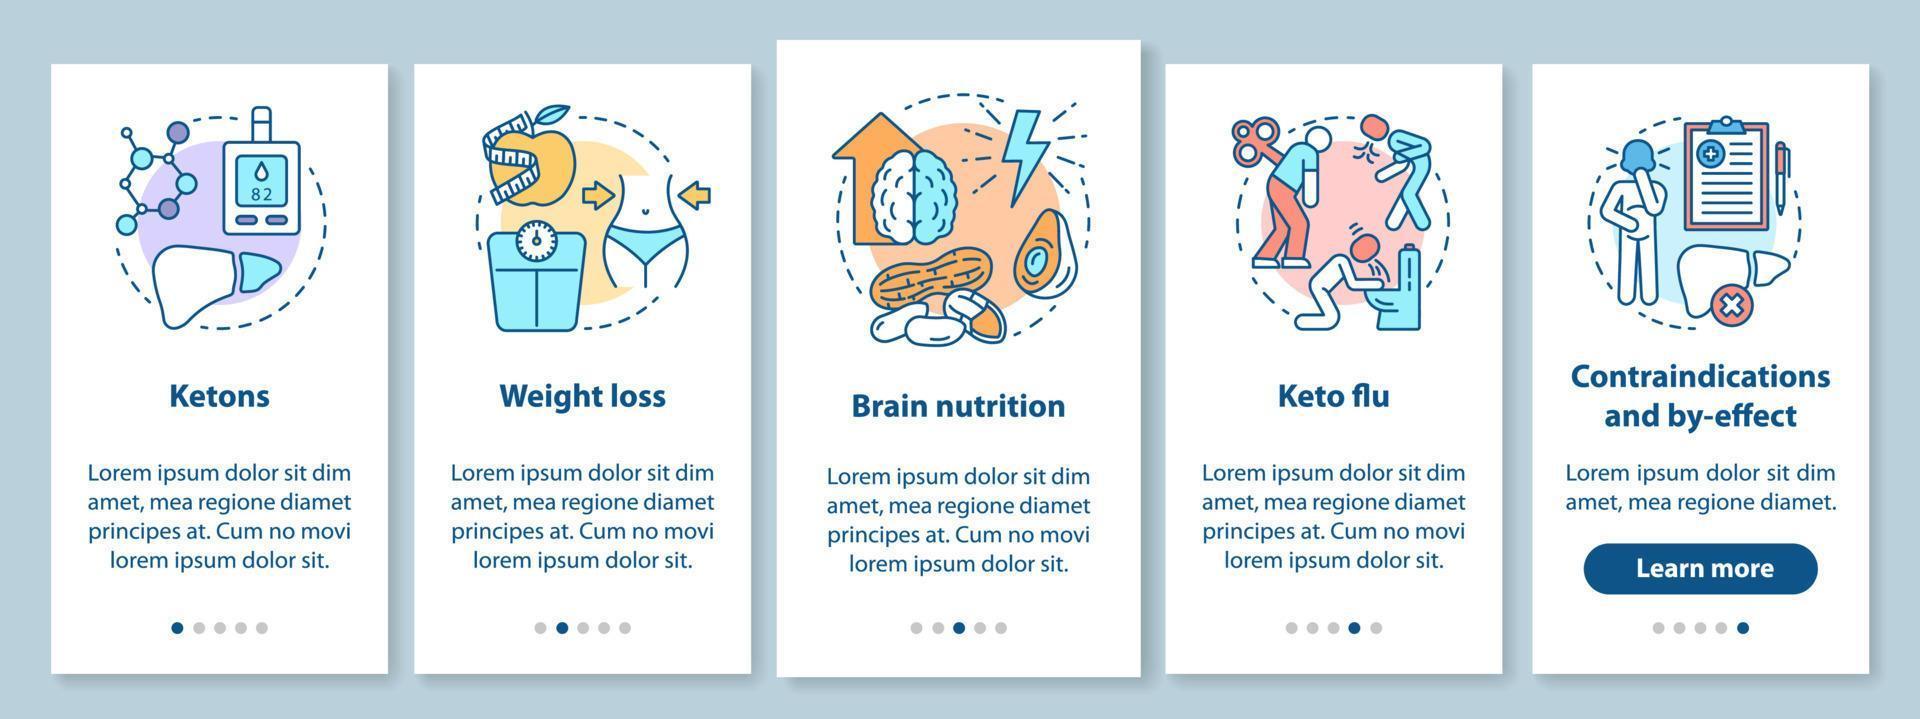 Keto diets onboarding mobile app page screen with linear concepts. Ketogenic eating and healthy nutrition walkthrough steps graphic instructions. UX, UI, GUI vector template with illustrations